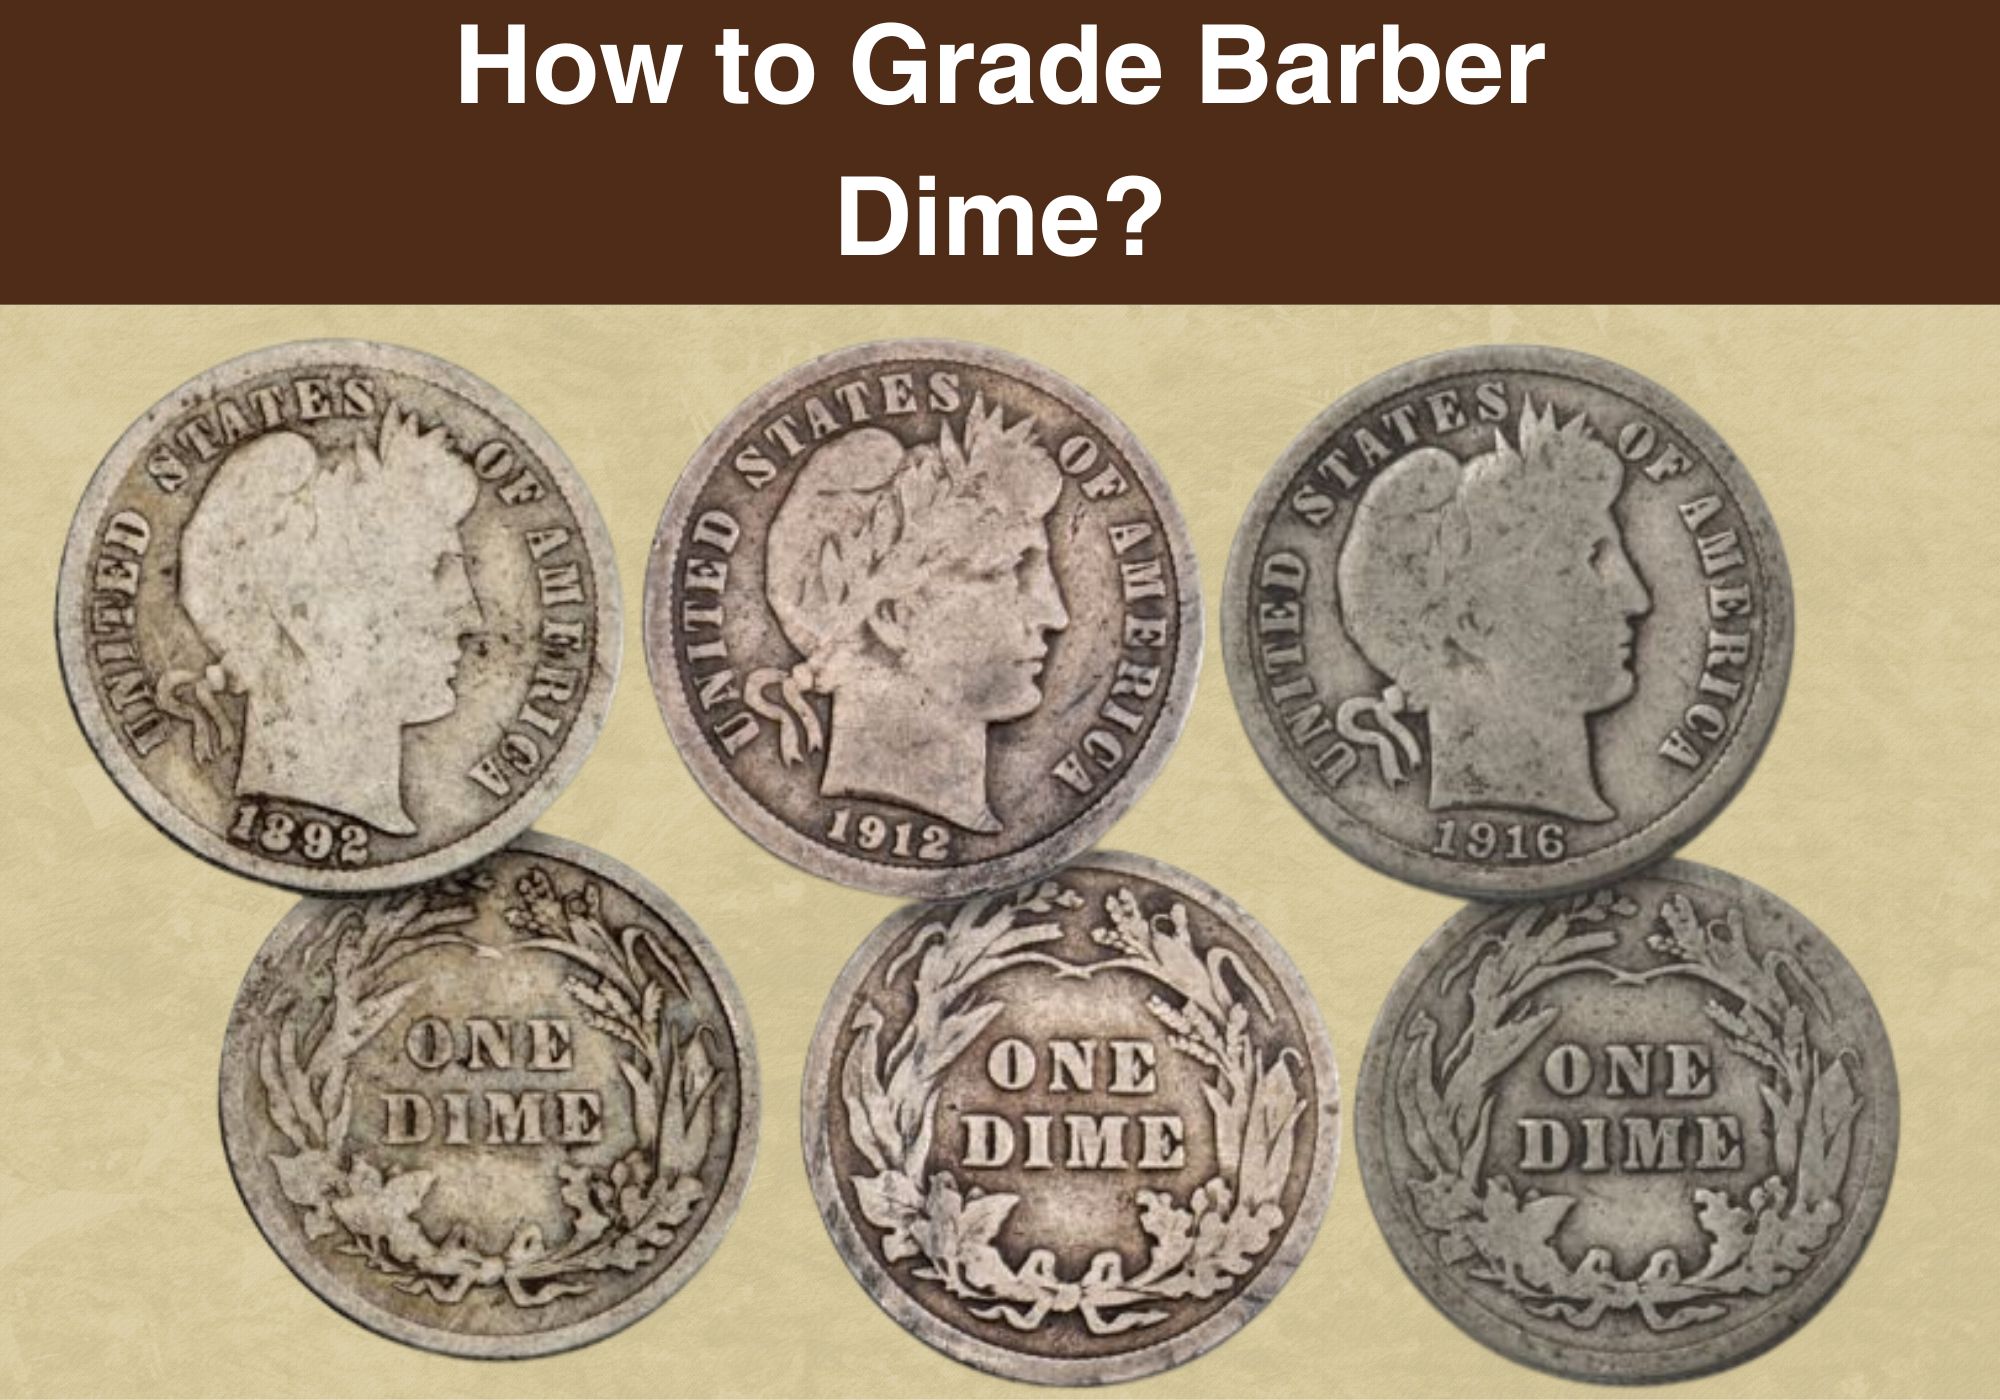 How to Grade Barber Dime